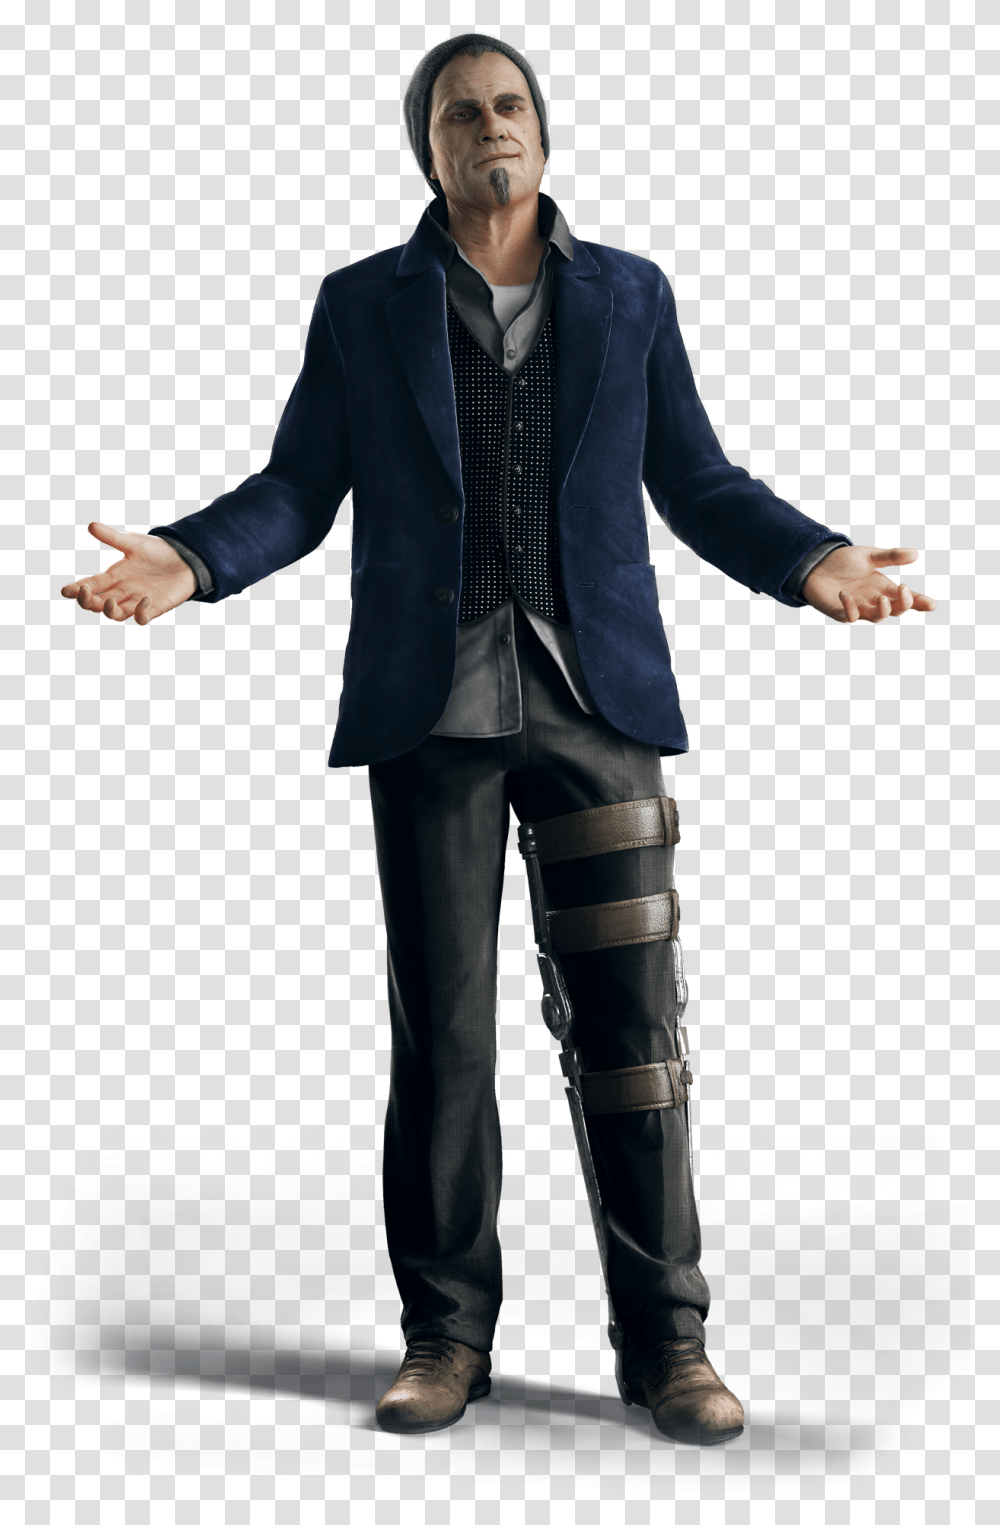 Watch Dogs Damien Brenks Damien From Watch Dogs, Suit, Overcoat, Person Transparent Png